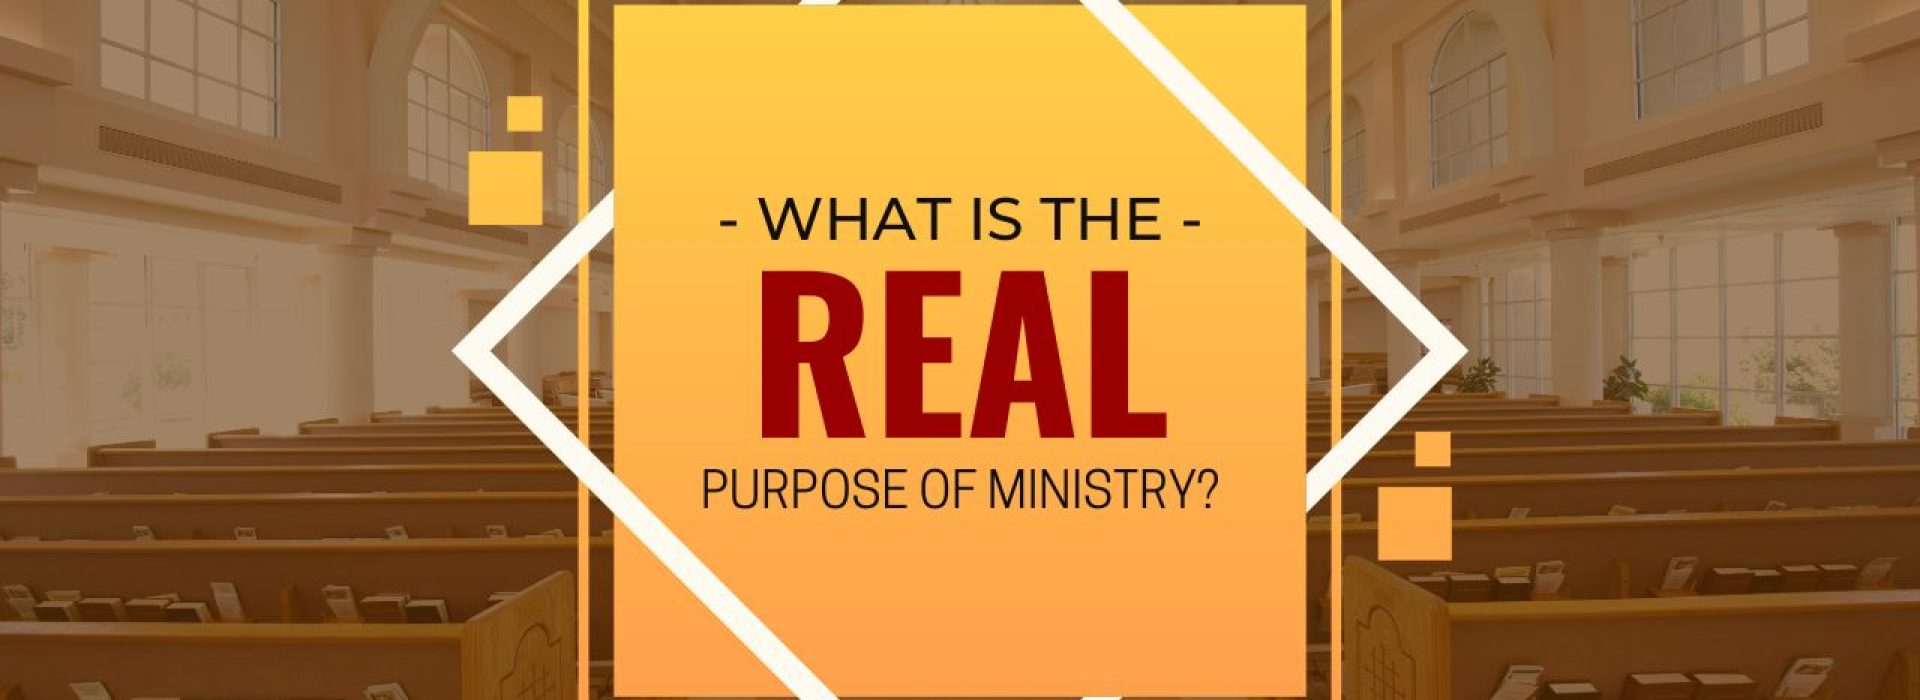 What Is The Real Purpose of the Ministry? - Pastor Greg Neal